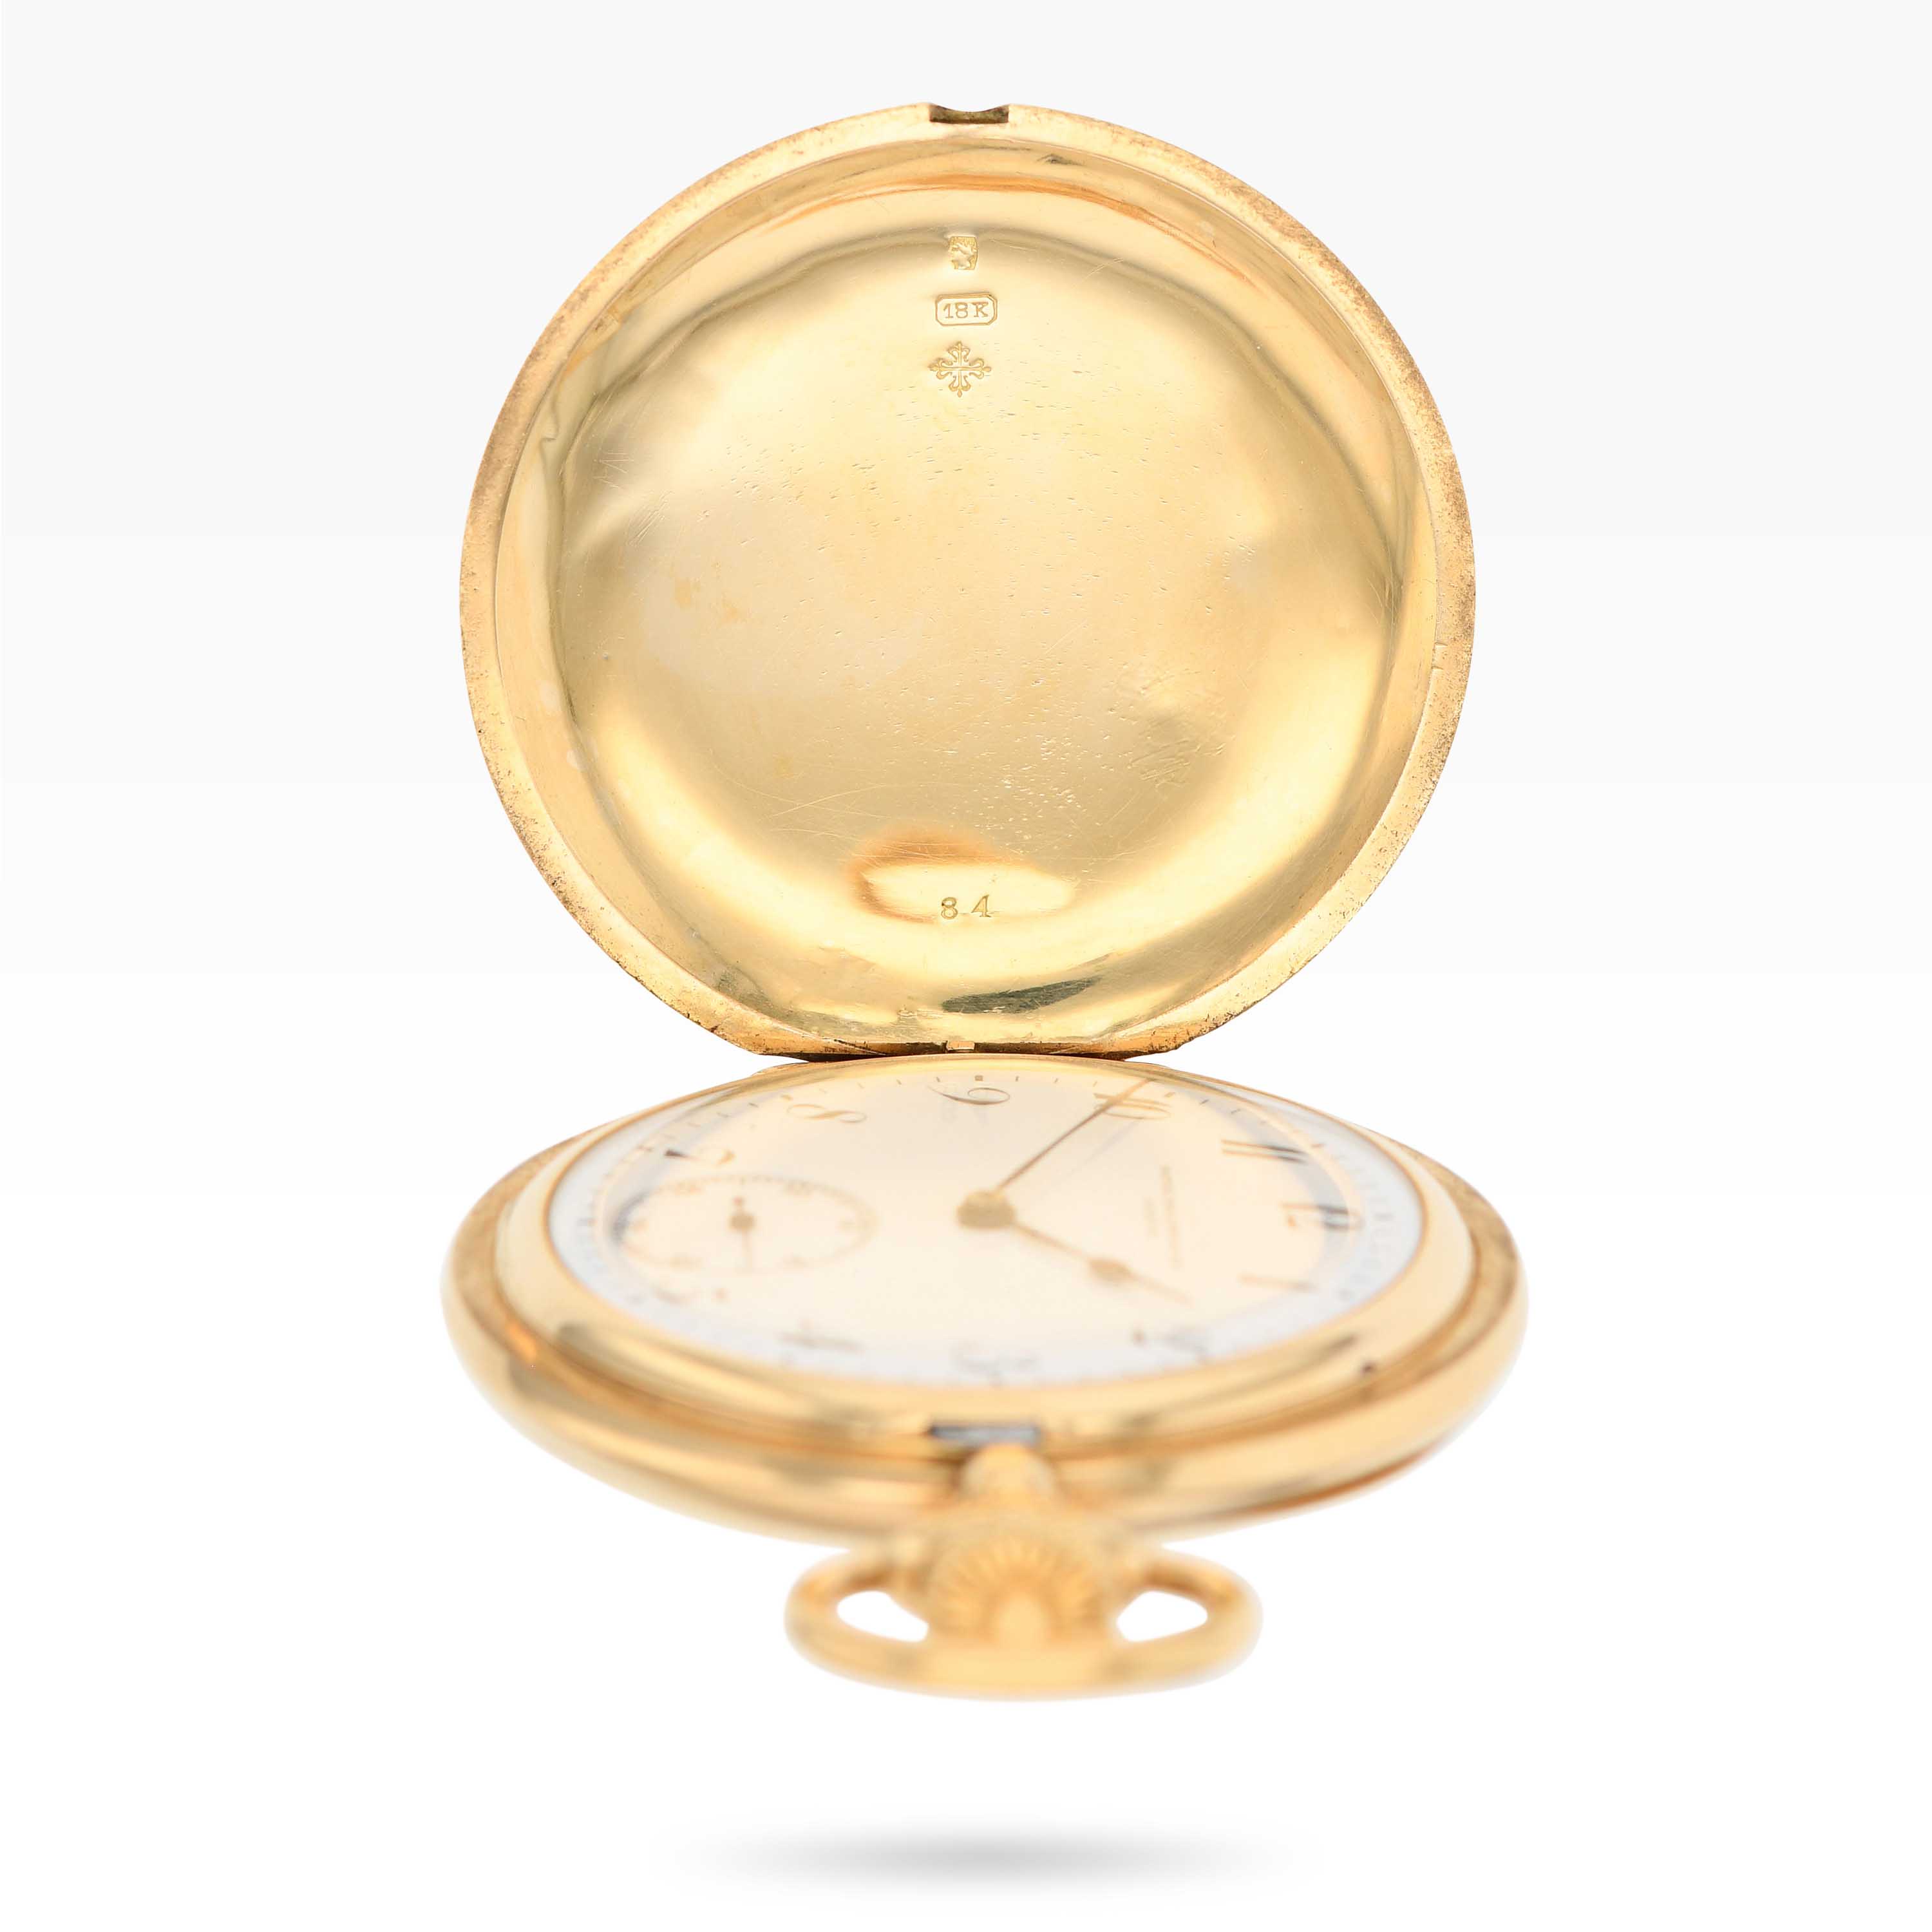 1302PW1 Patek Philippe Hunter Case with suspended Breguet numerals Pocket Watch img-main2